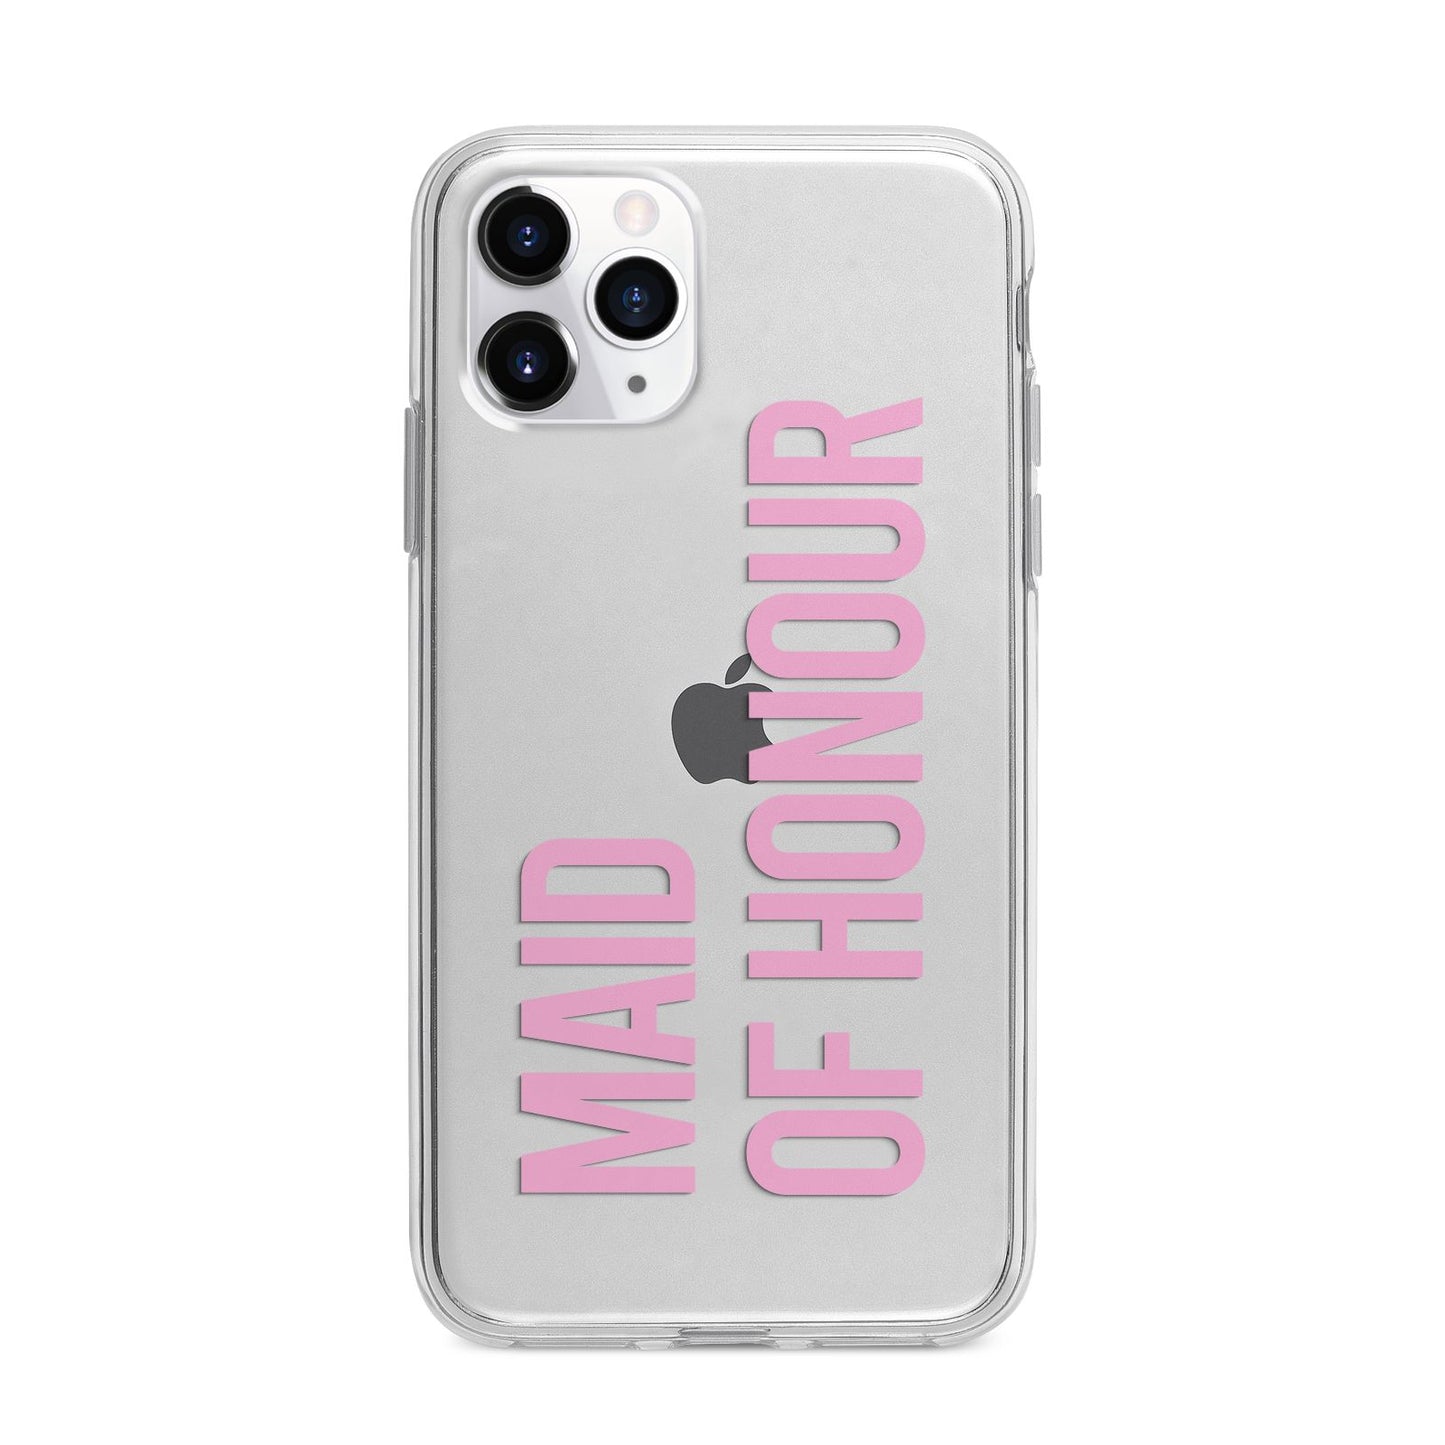 Maid of Honour Apple iPhone 11 Pro Max in Silver with Bumper Case